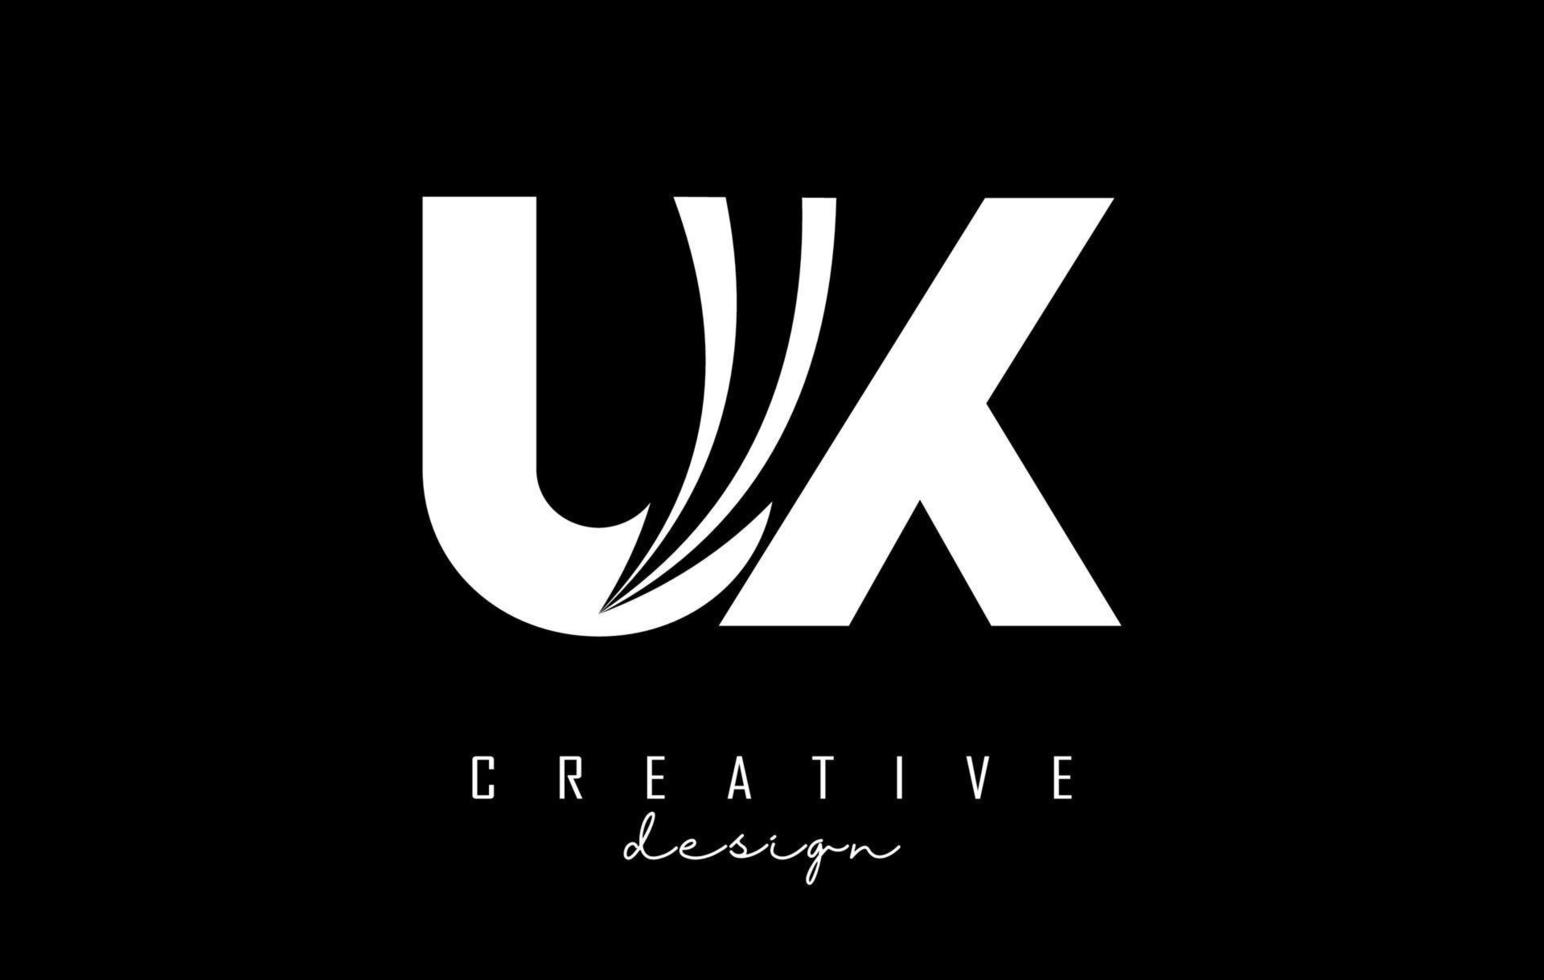 Creative white letters UX u xlogo with leading lines and road concept design. Letters with geometric design. vector